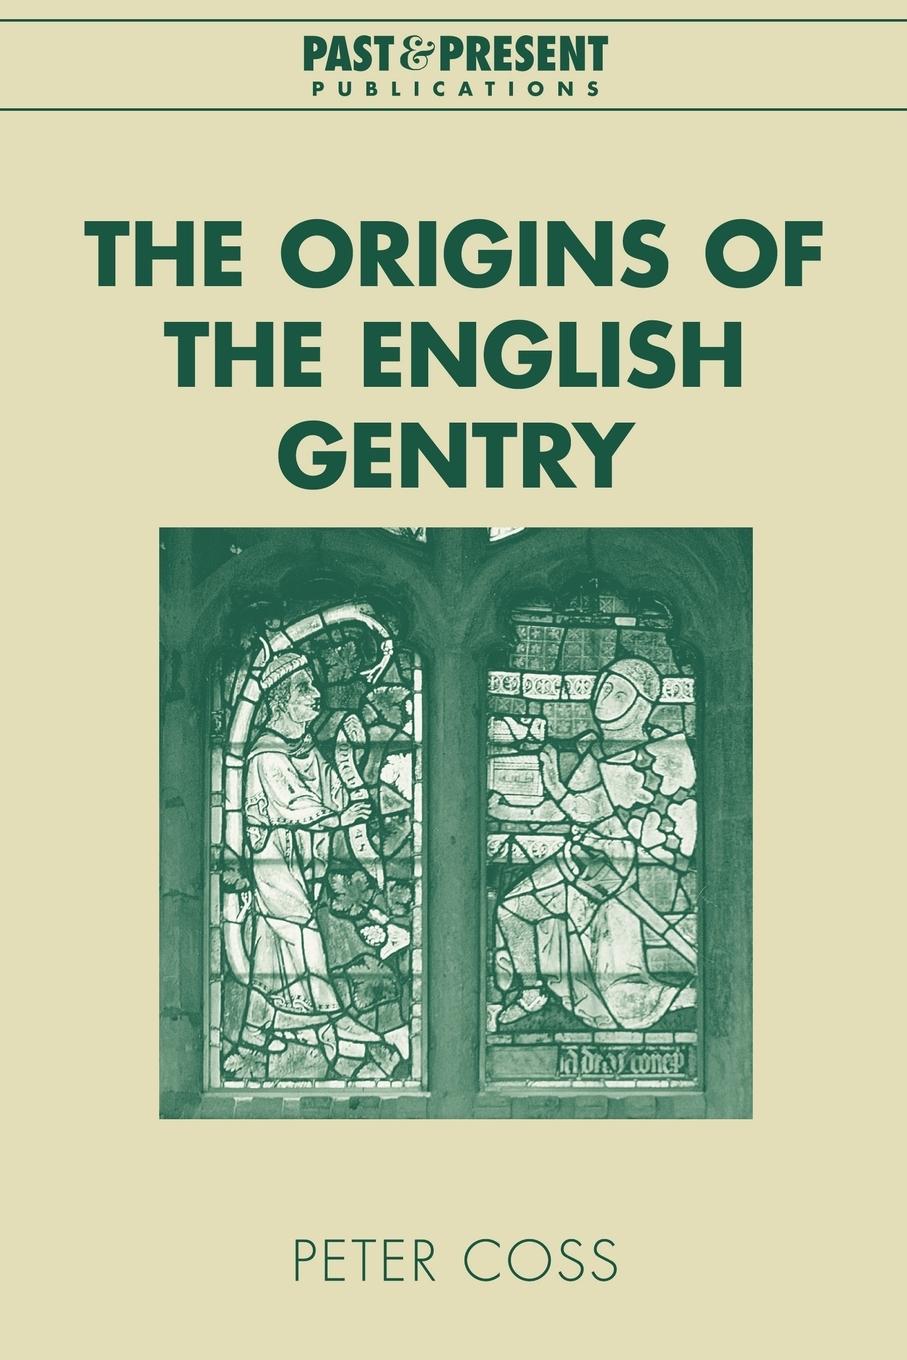 The Origins of the English Gentry - Coss, Peter|Peter, Coss